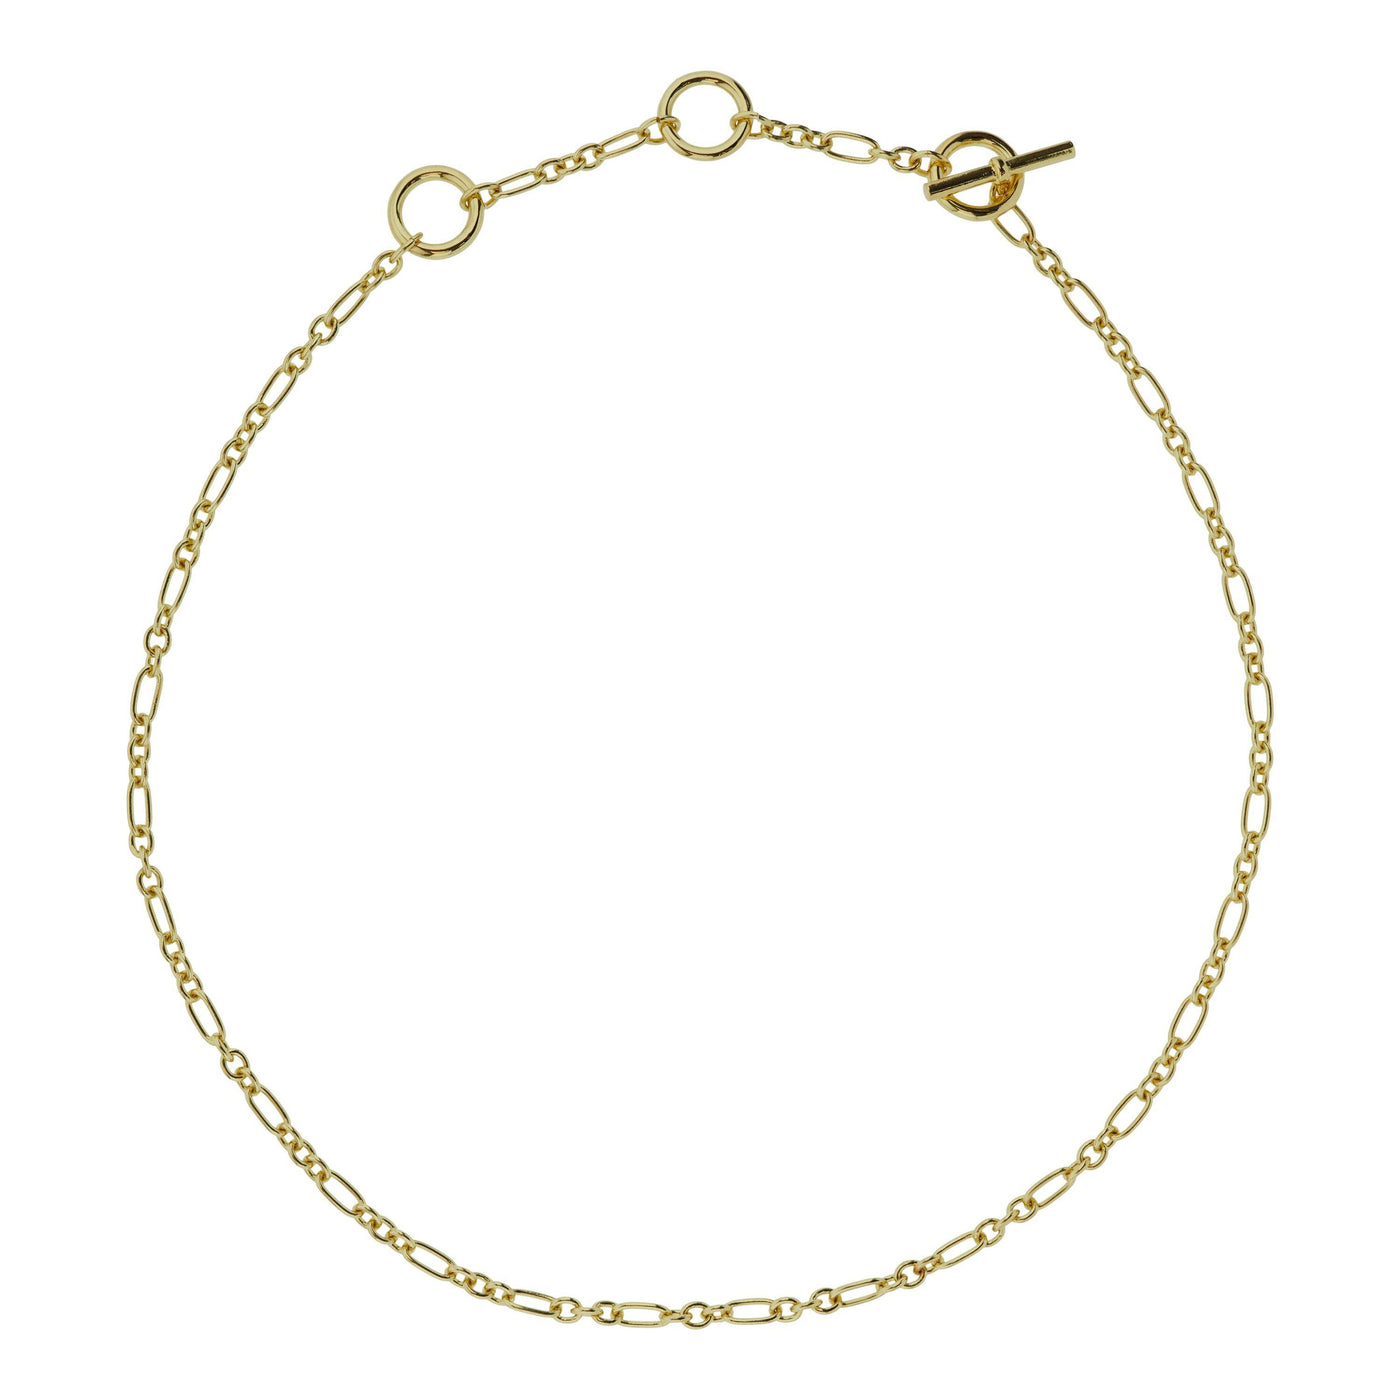 HEIDI DAUS®"Let's Connect" Chain Toggle Necklace